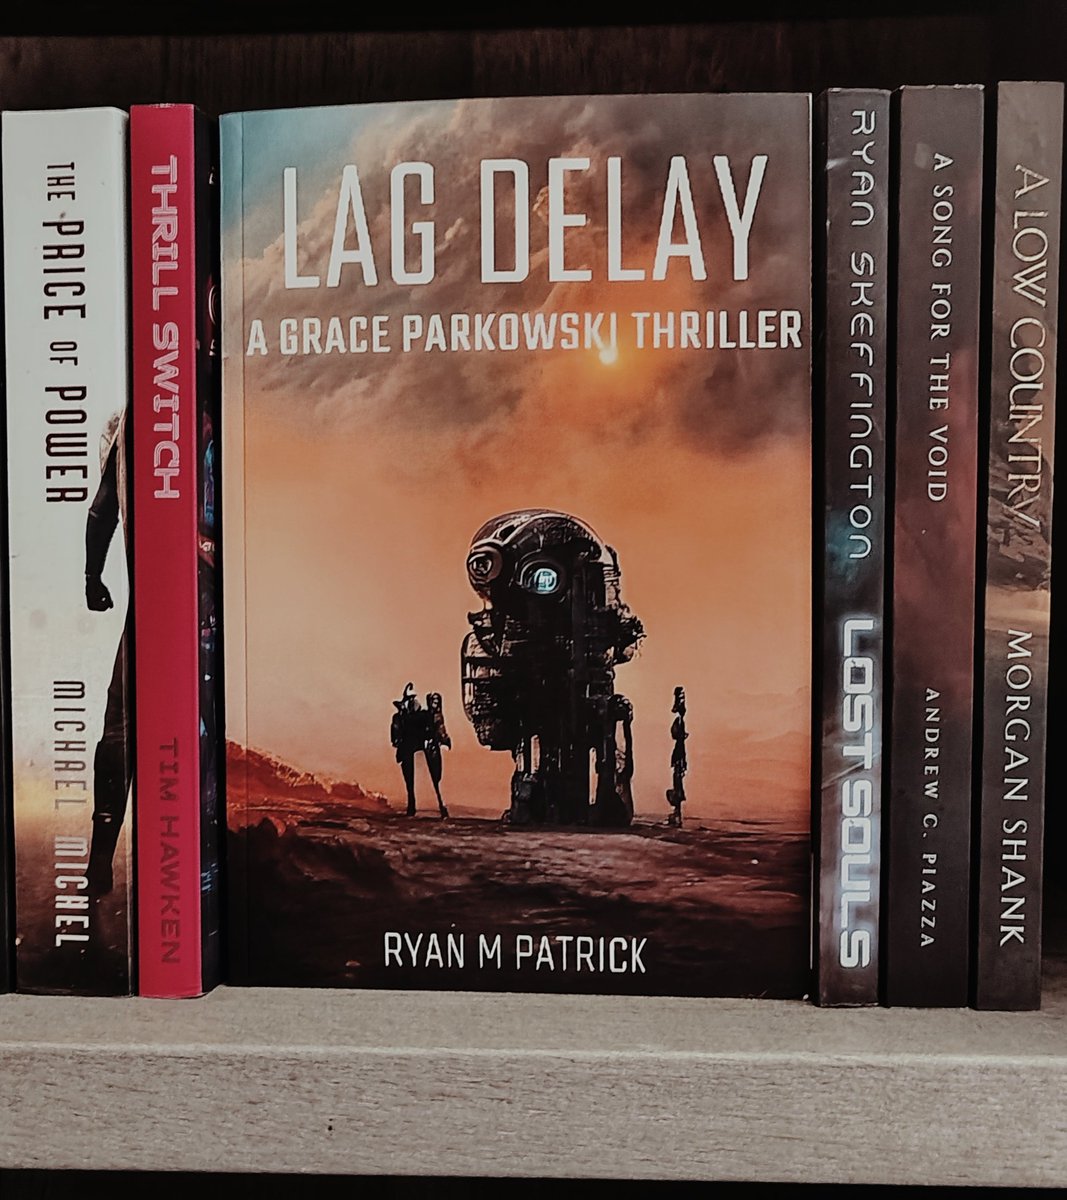 A few days late in posting but ... BOOK MAIL! Check out Ryan Patrick's @ryanpatrickauth debut sci-fi thriller!